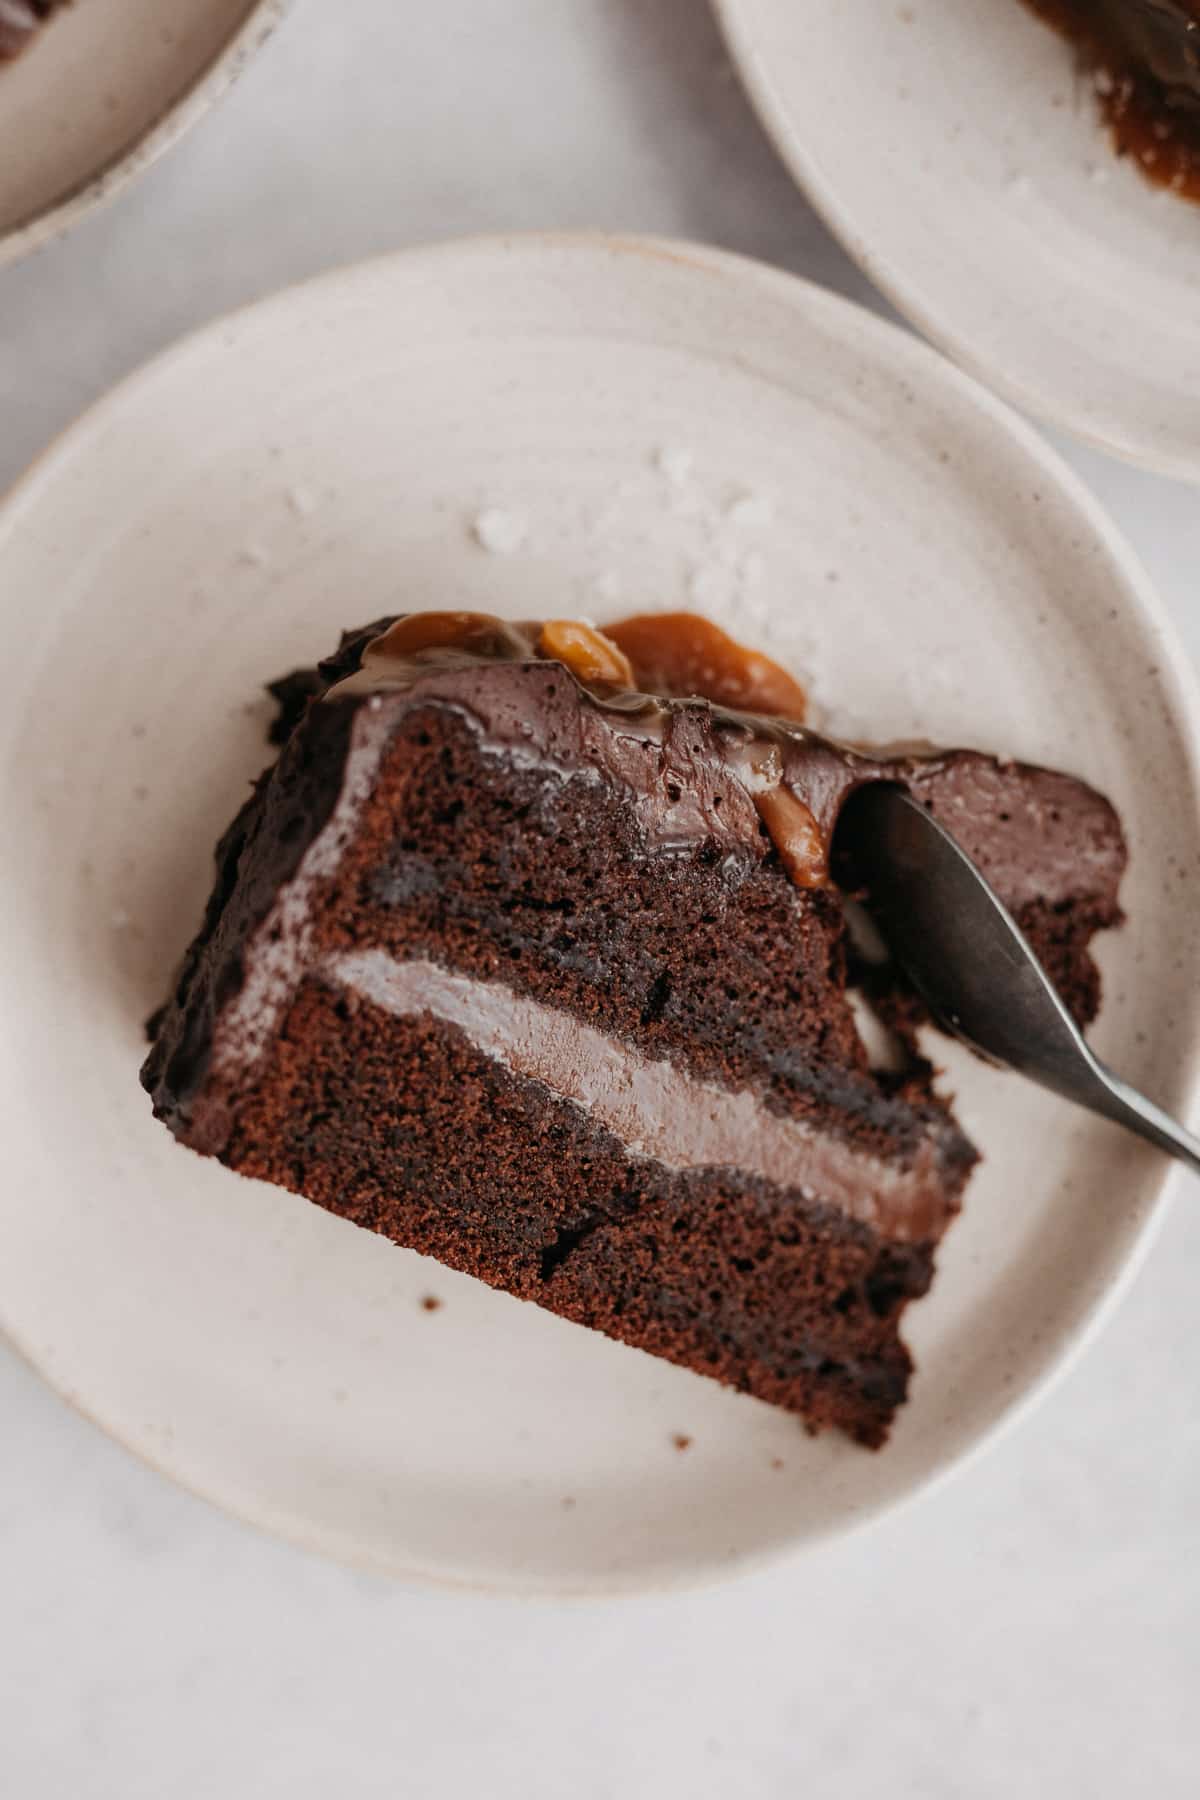 A salted caramel chocolate cake slice on a small beige plate